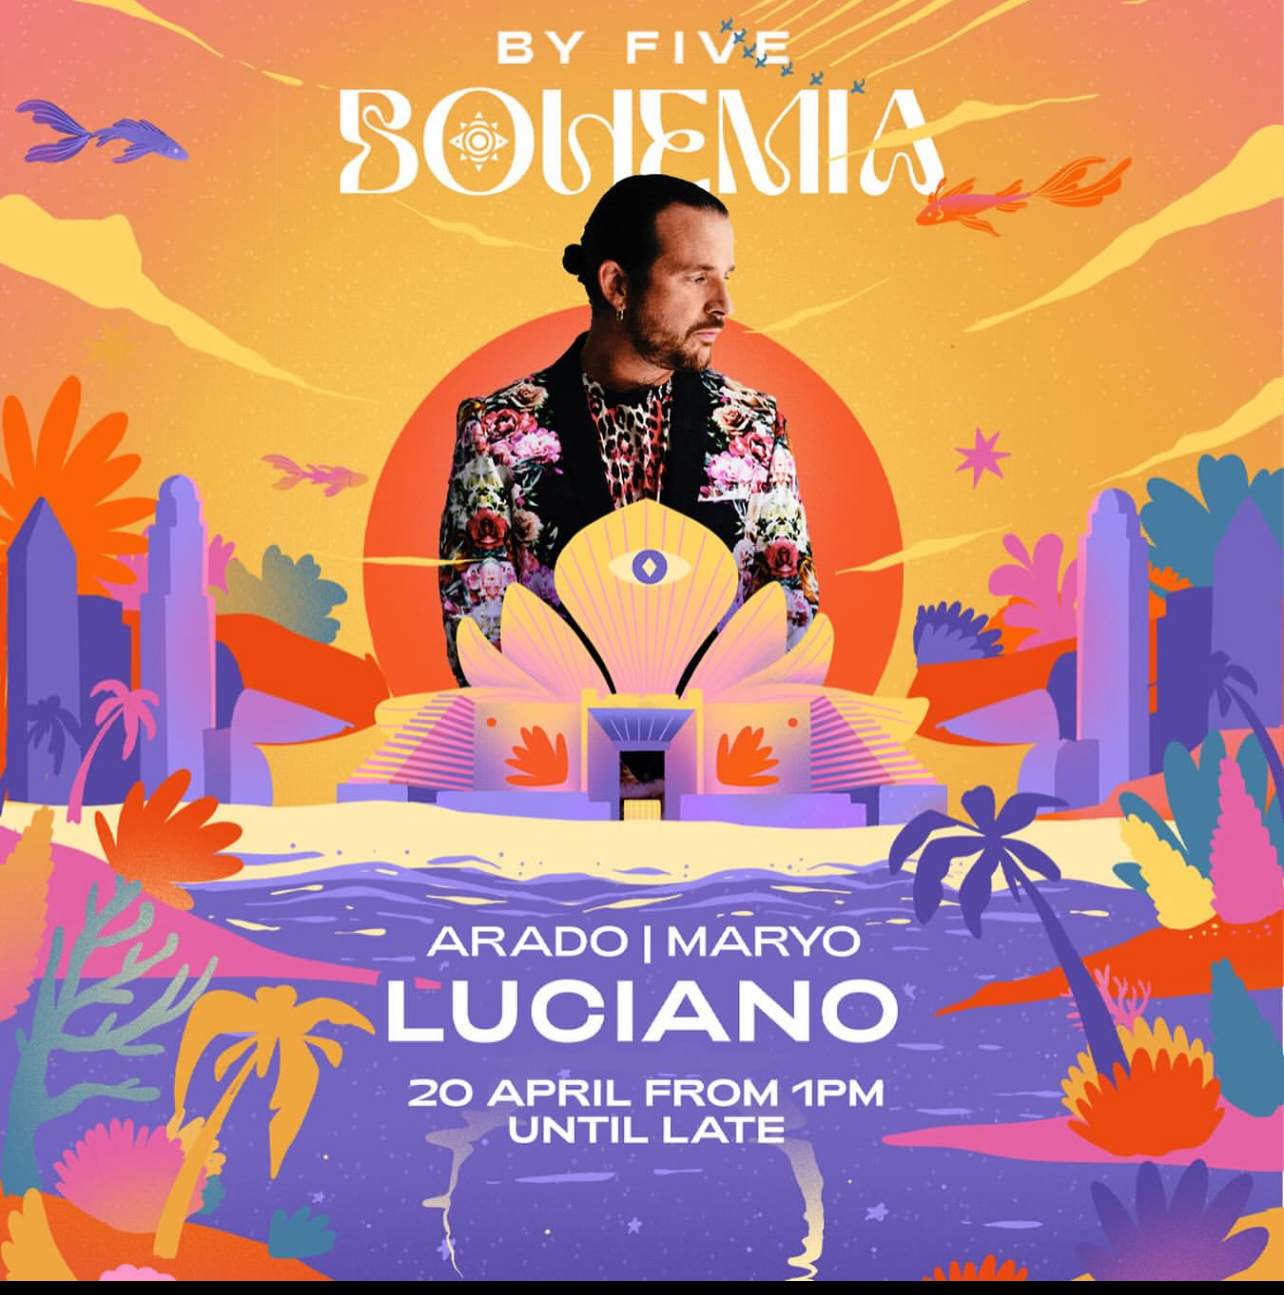 Bohemia by Five present Luciano - Página frontal